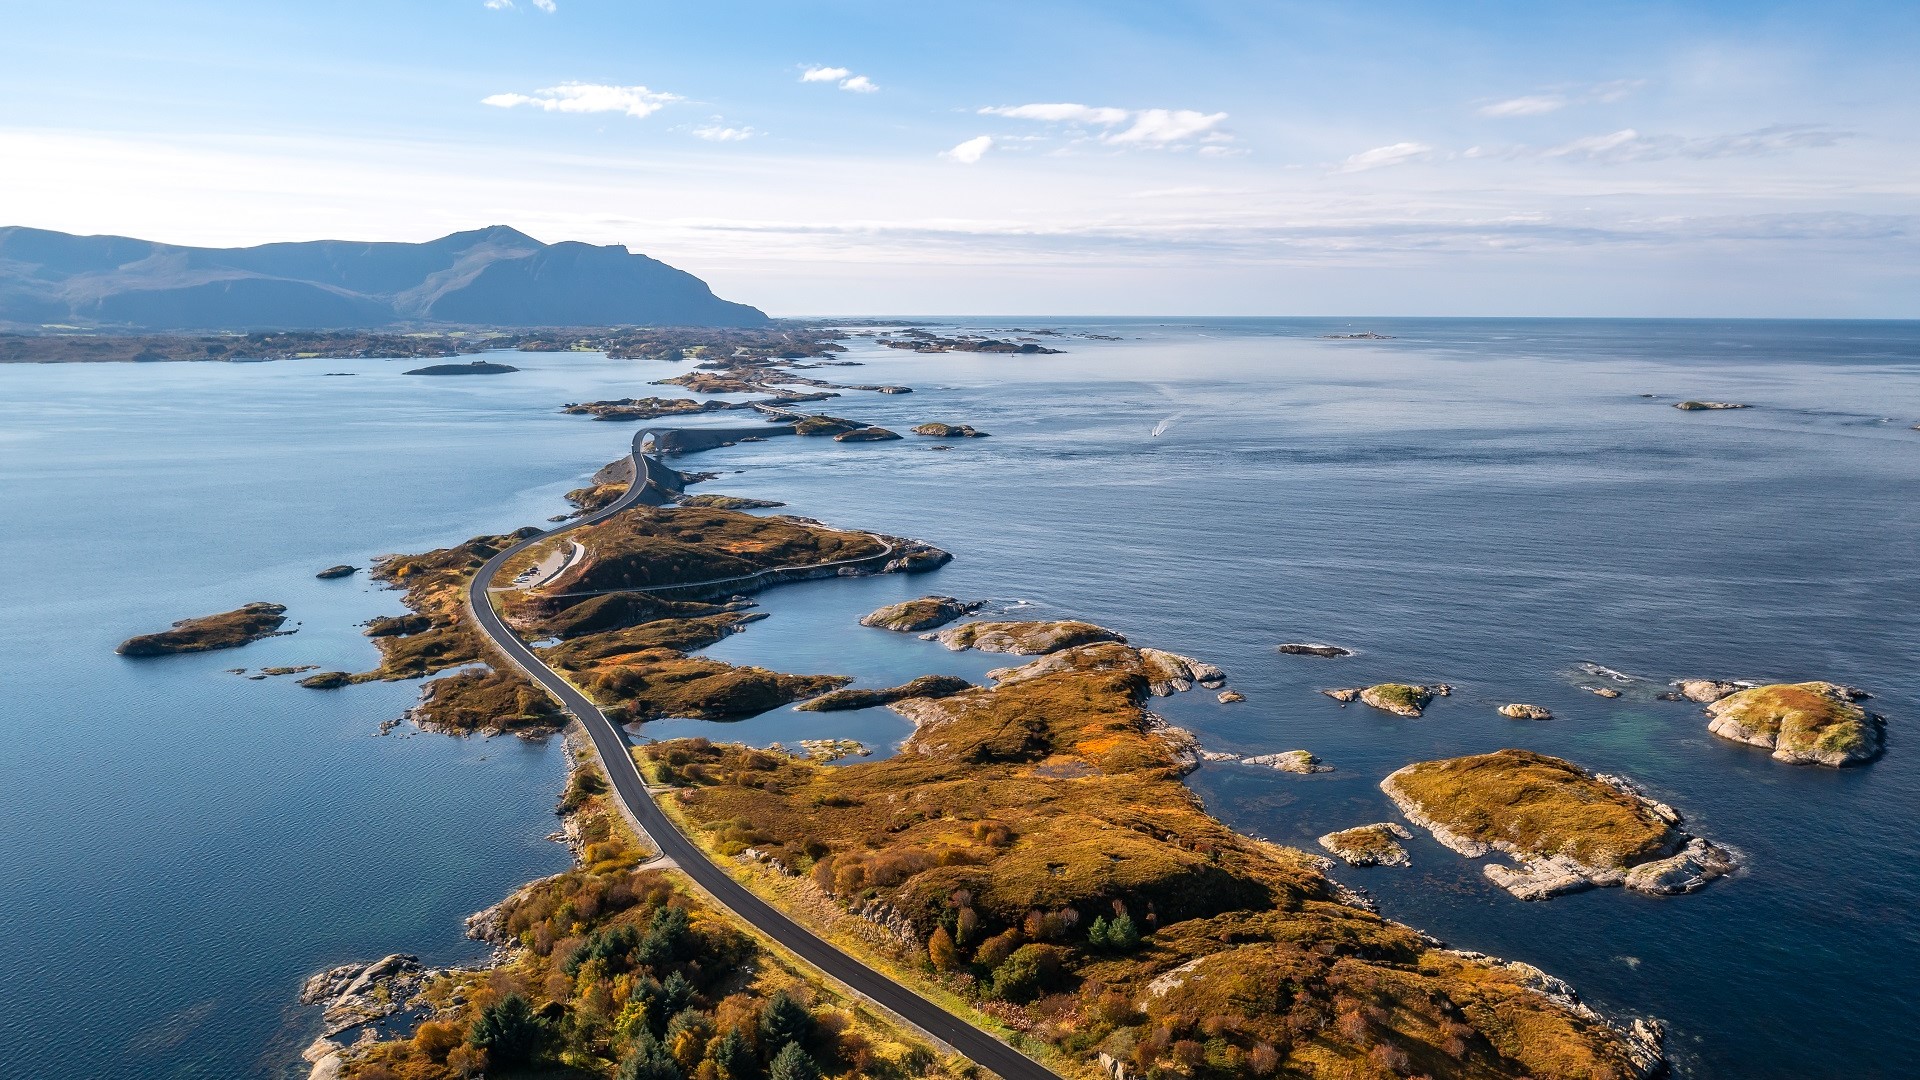 Nordic road going through water to island of mountains